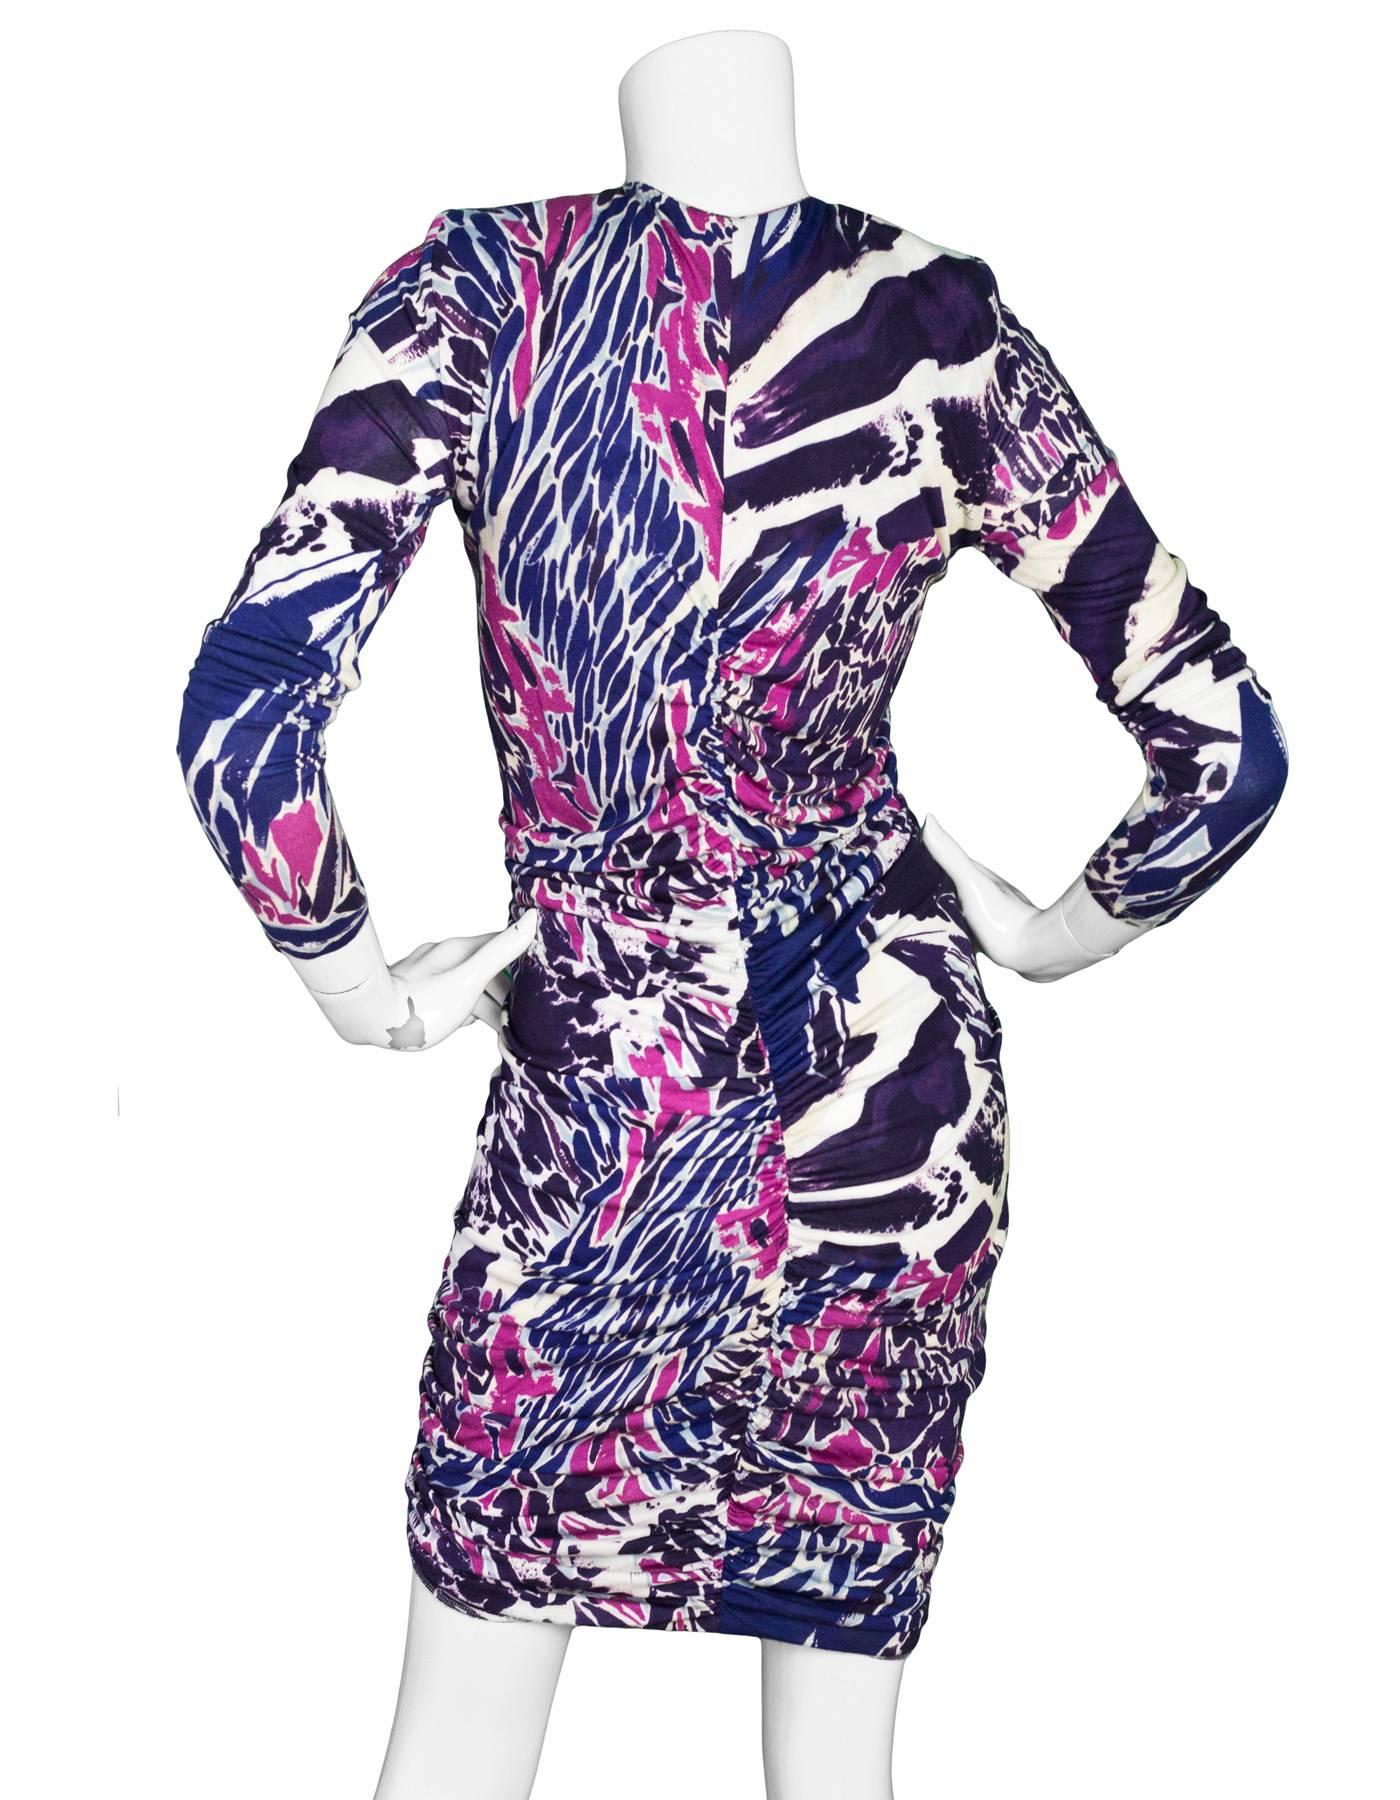 Emilio Pucci Purple & Pink Print Dress Sz 12
Features shoulder padding and front zup closure with ruching throughout

Made In: Italy
Color: Purple, pink, ivory
Composition: 100% Rayon
Lining: None
Closure/Opening: Front zip closure
Overall